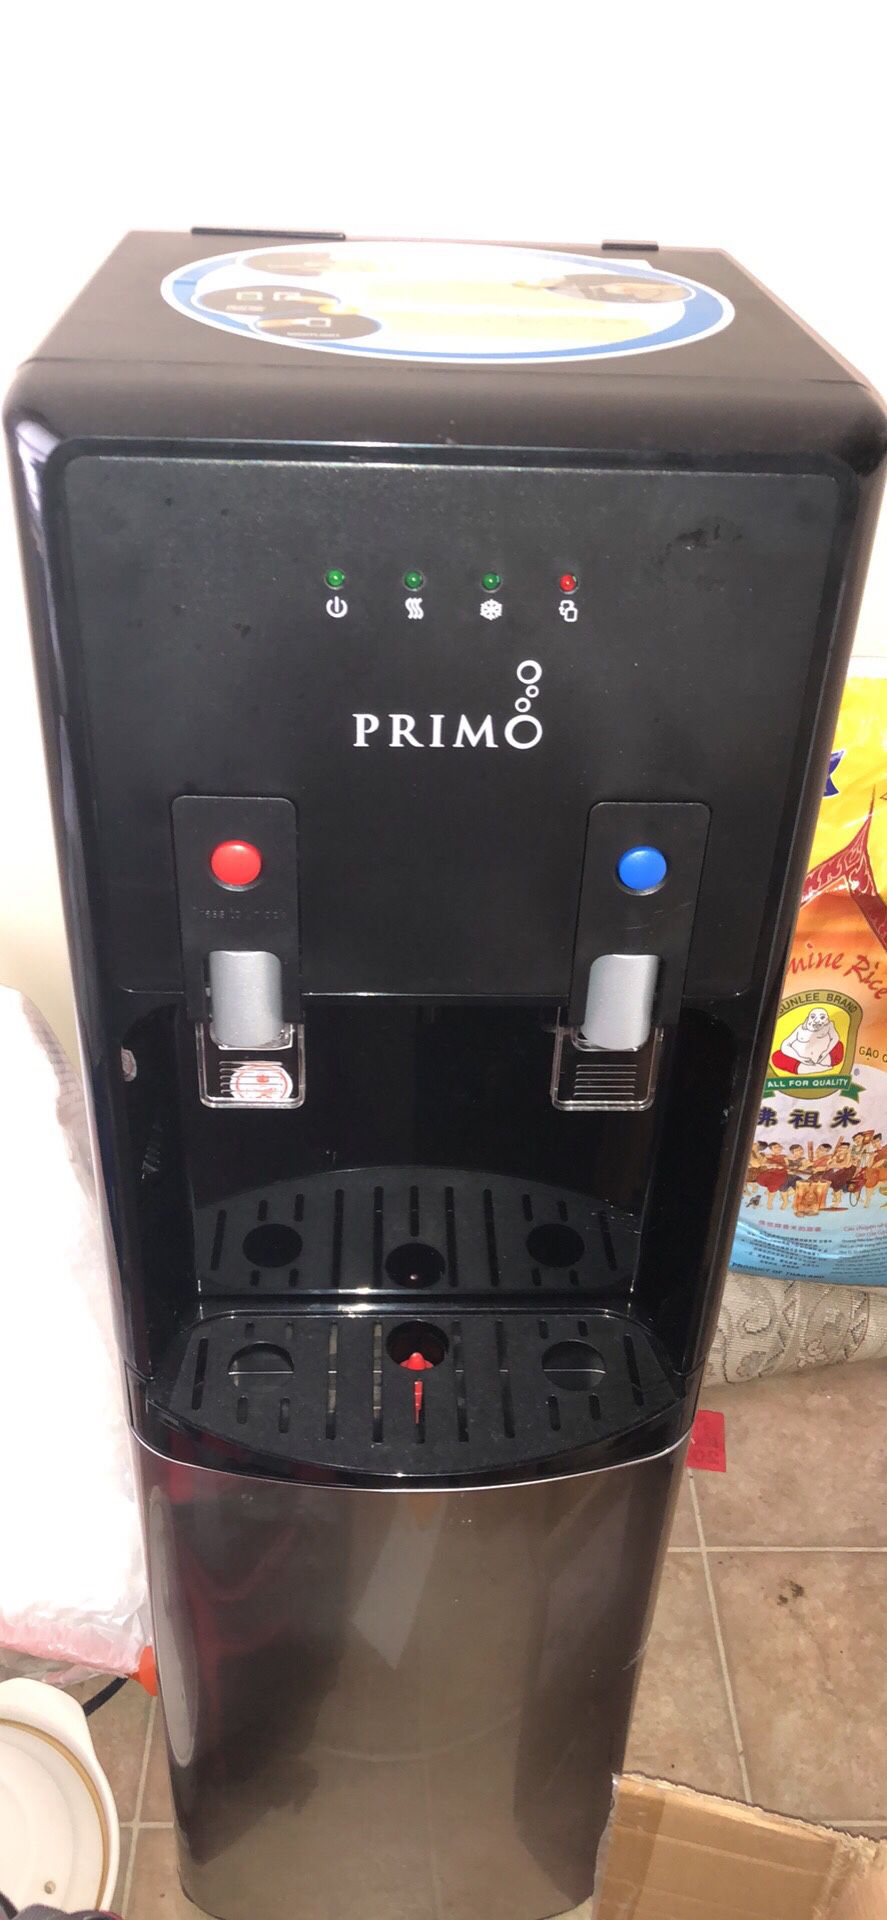 Primo water